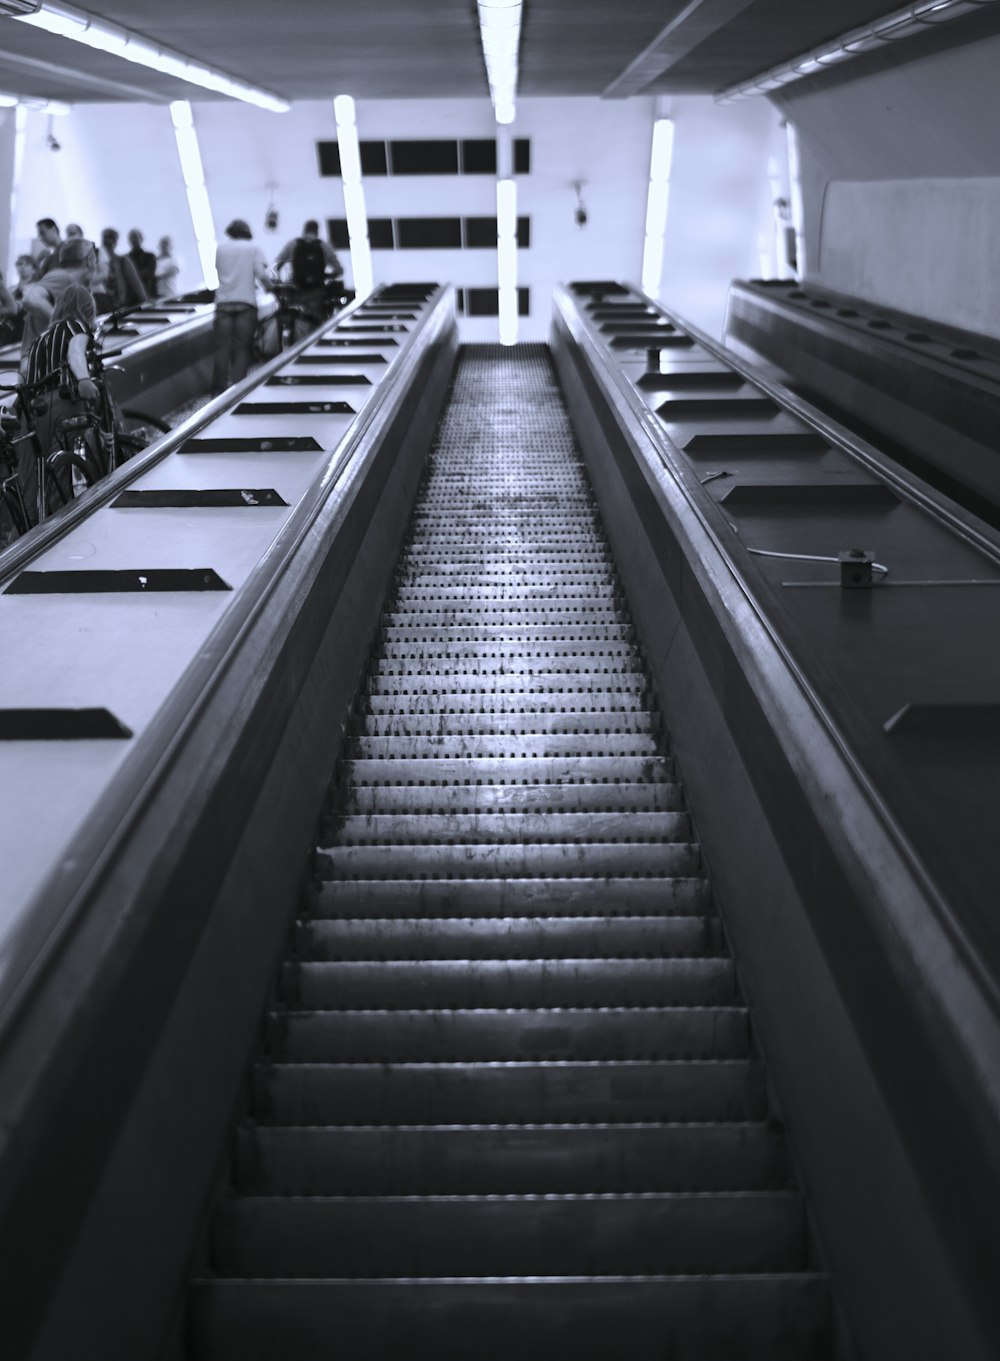 grayscale photography of people in escalator inside building